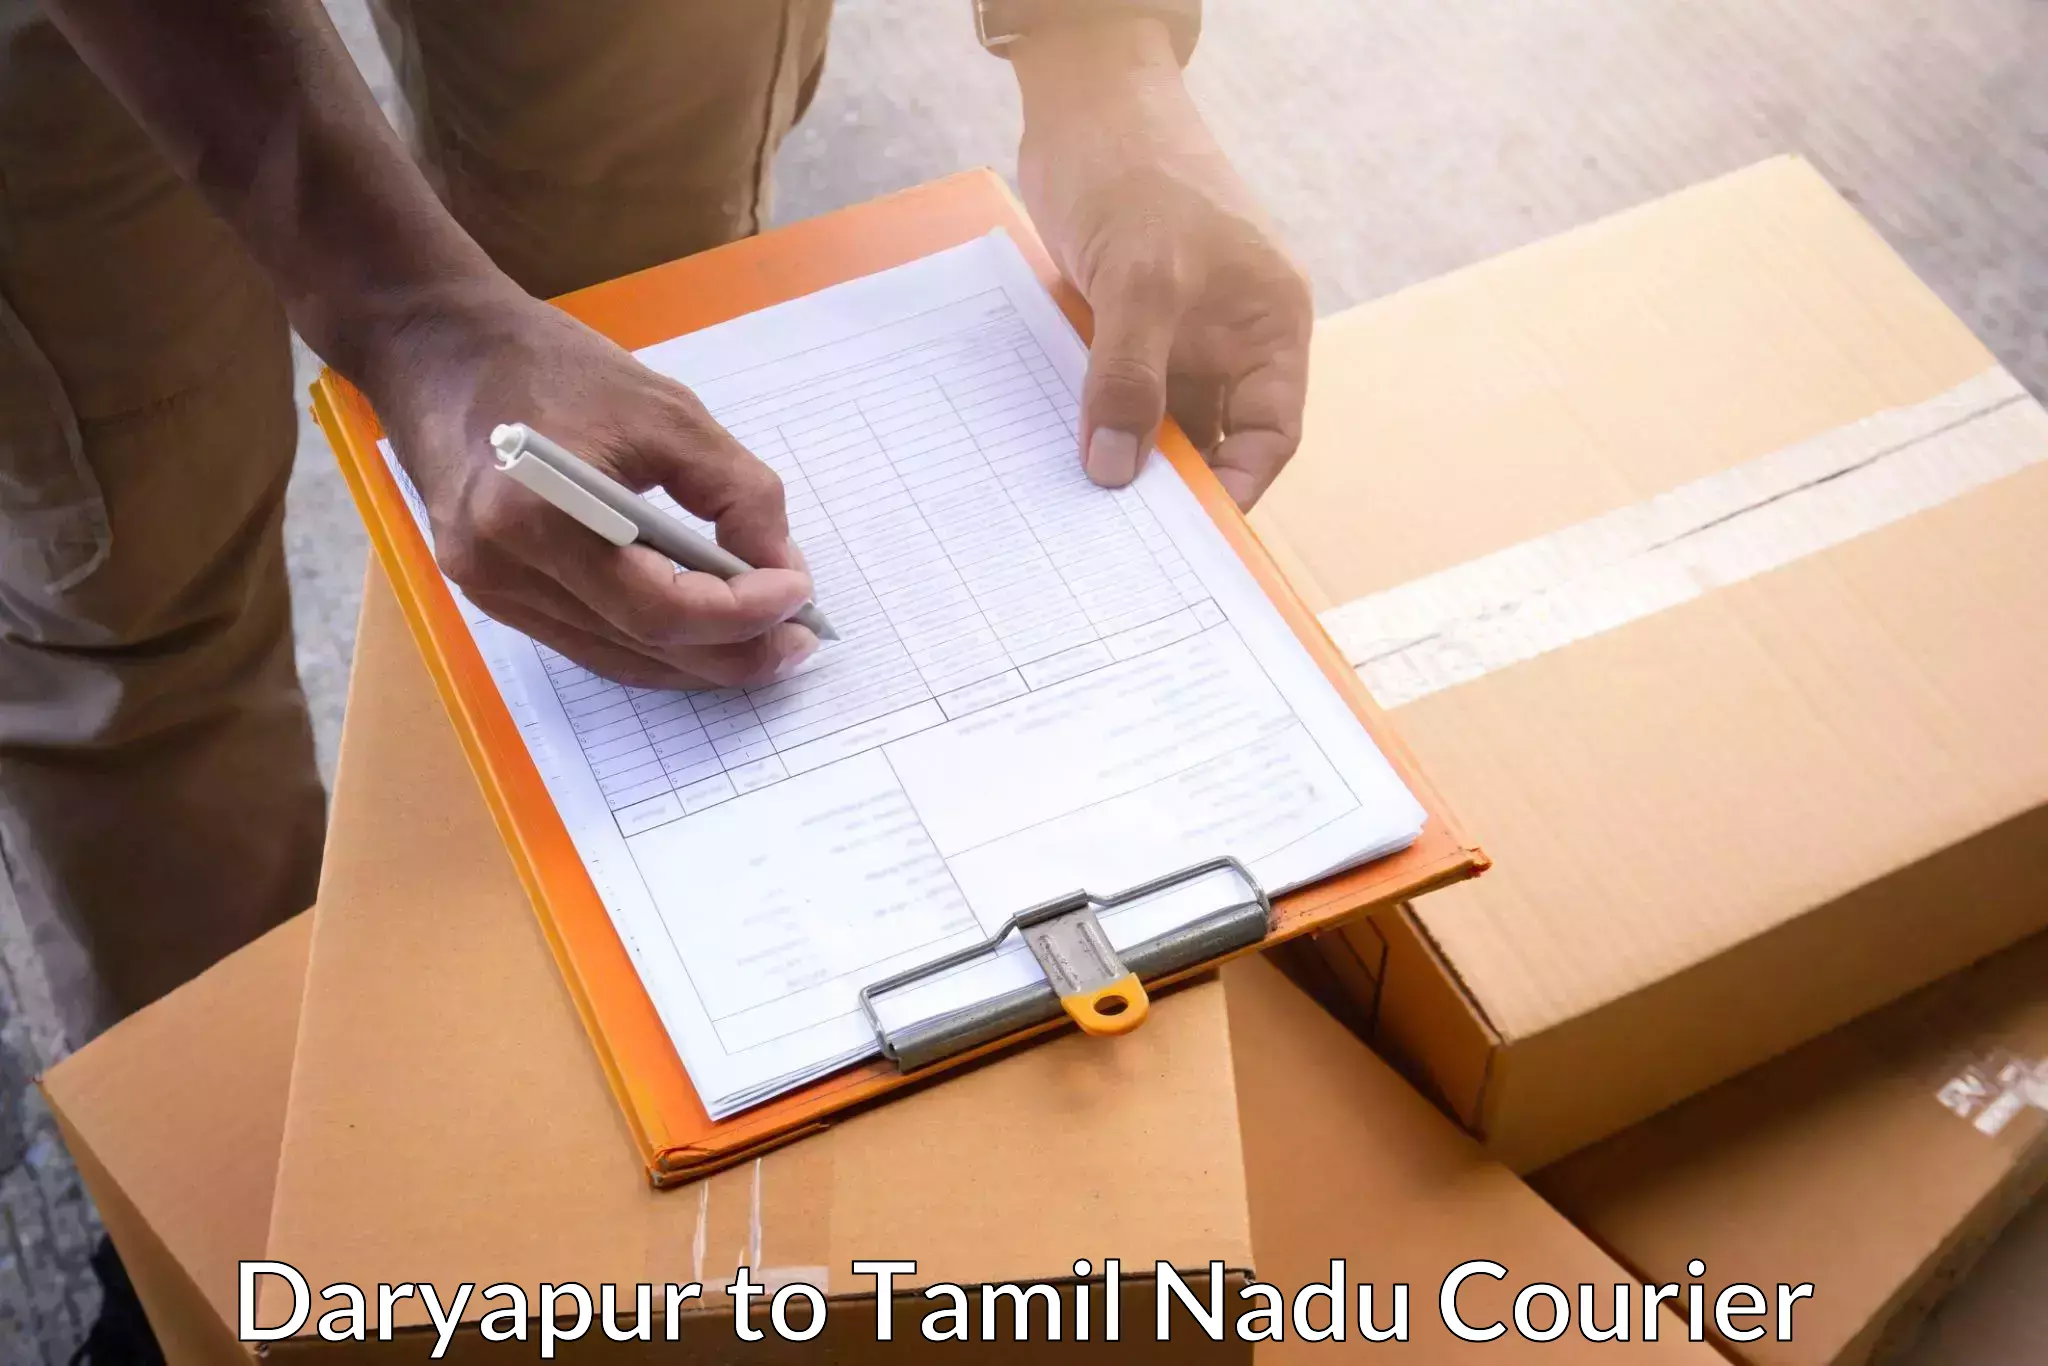 Business delivery service Daryapur to Gobichettipalayam